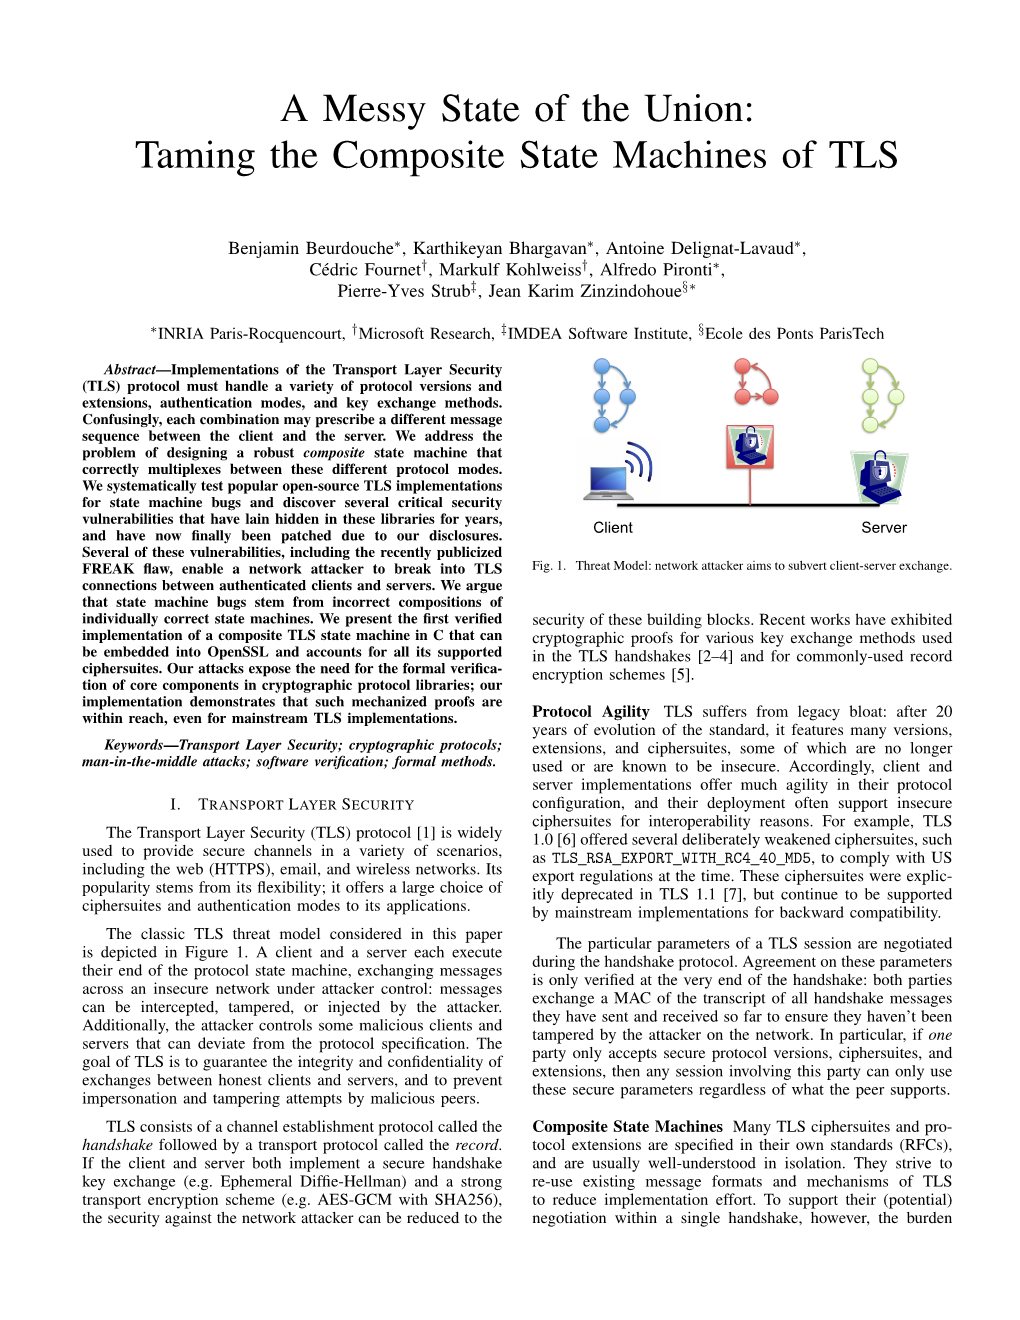 A Messy State of the Union: Taming the Composite State Machines of TLS